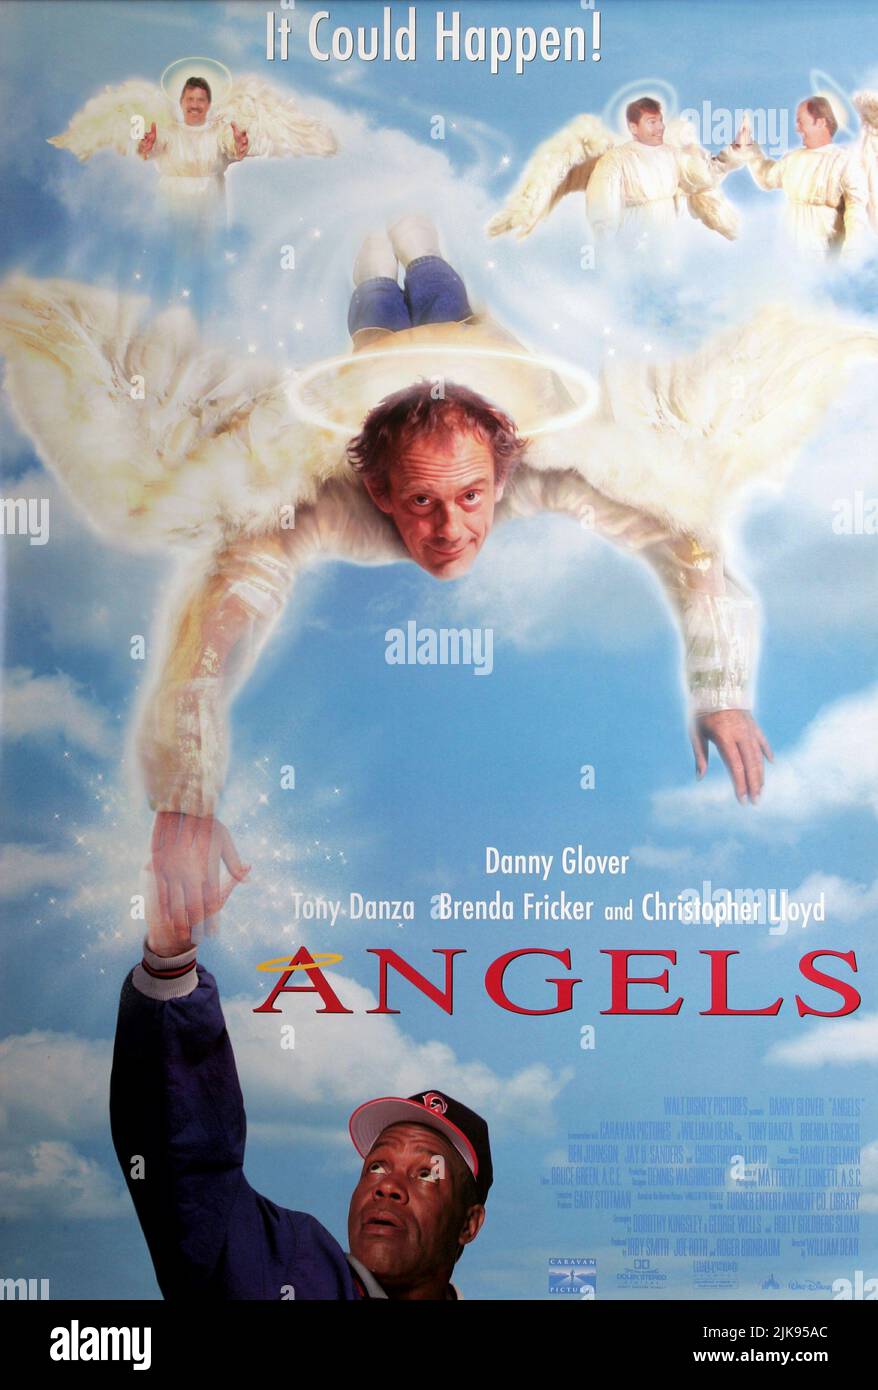 Angels In The Outfield Laserdisc Movie 1994 Danny Glover Tony Danza Chris  Lloyd